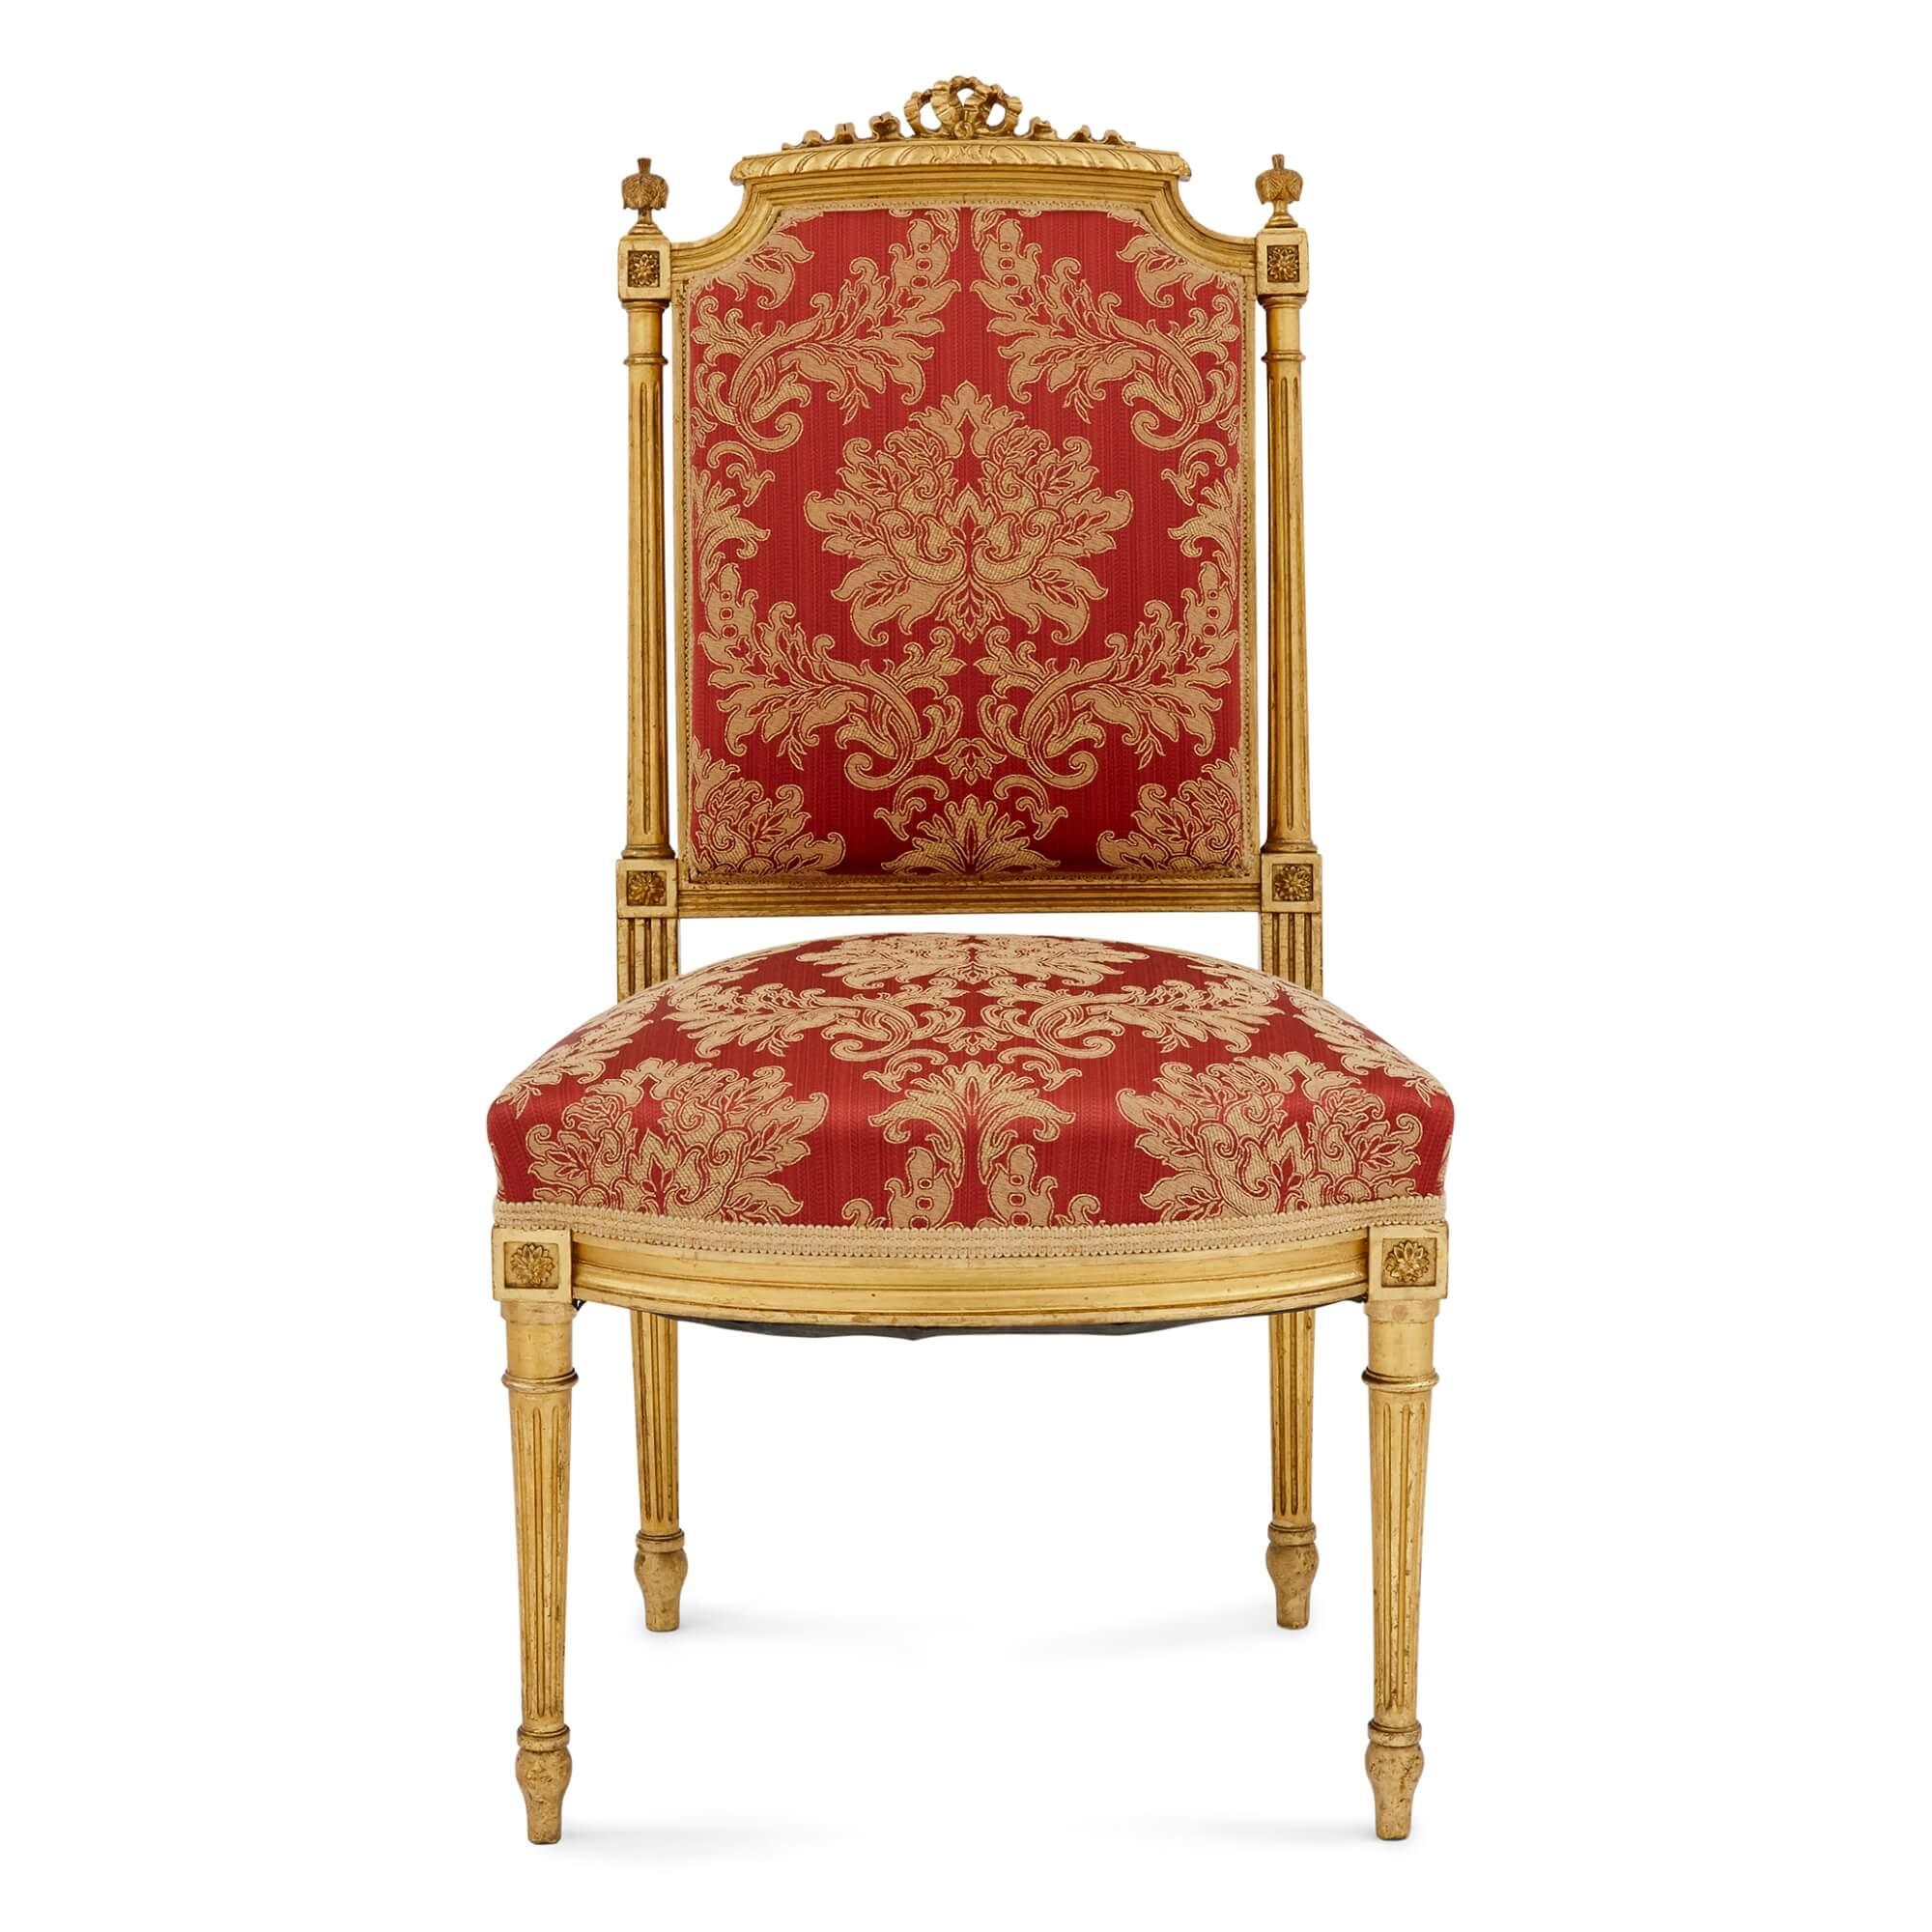 A French Louis XVI Style Giltwood Salon Suite 1